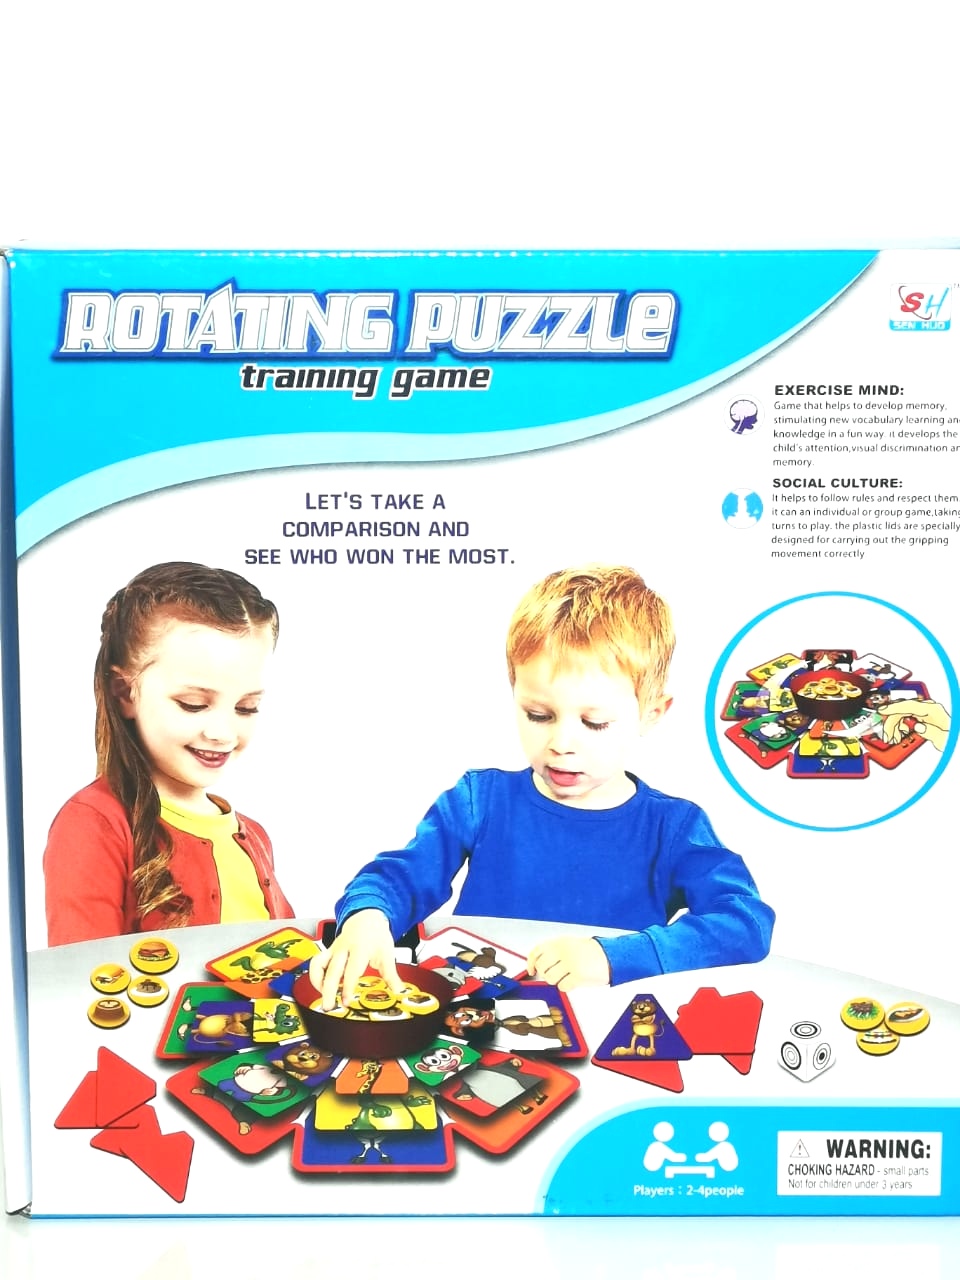 ROTAING PUZZLE TRAINING GAME